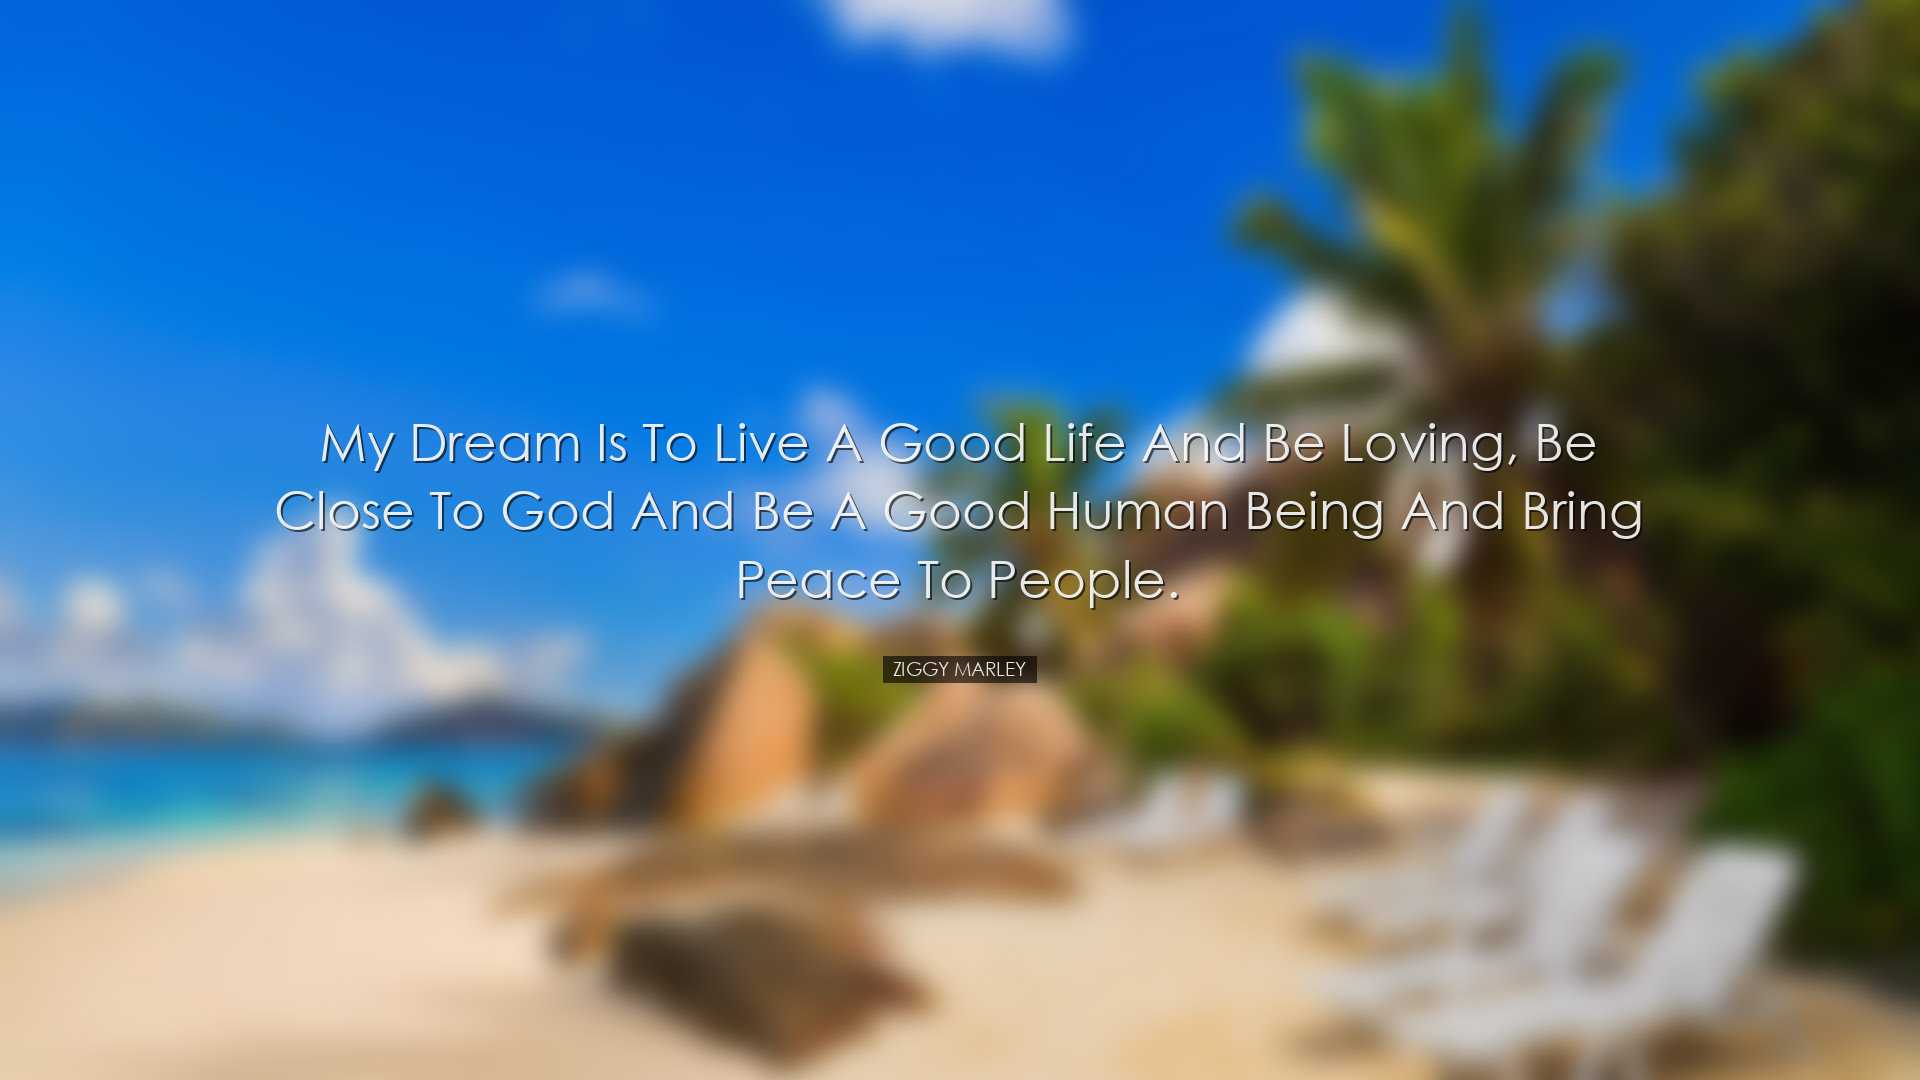 My dream is to live a good life and be loving, be close to God and